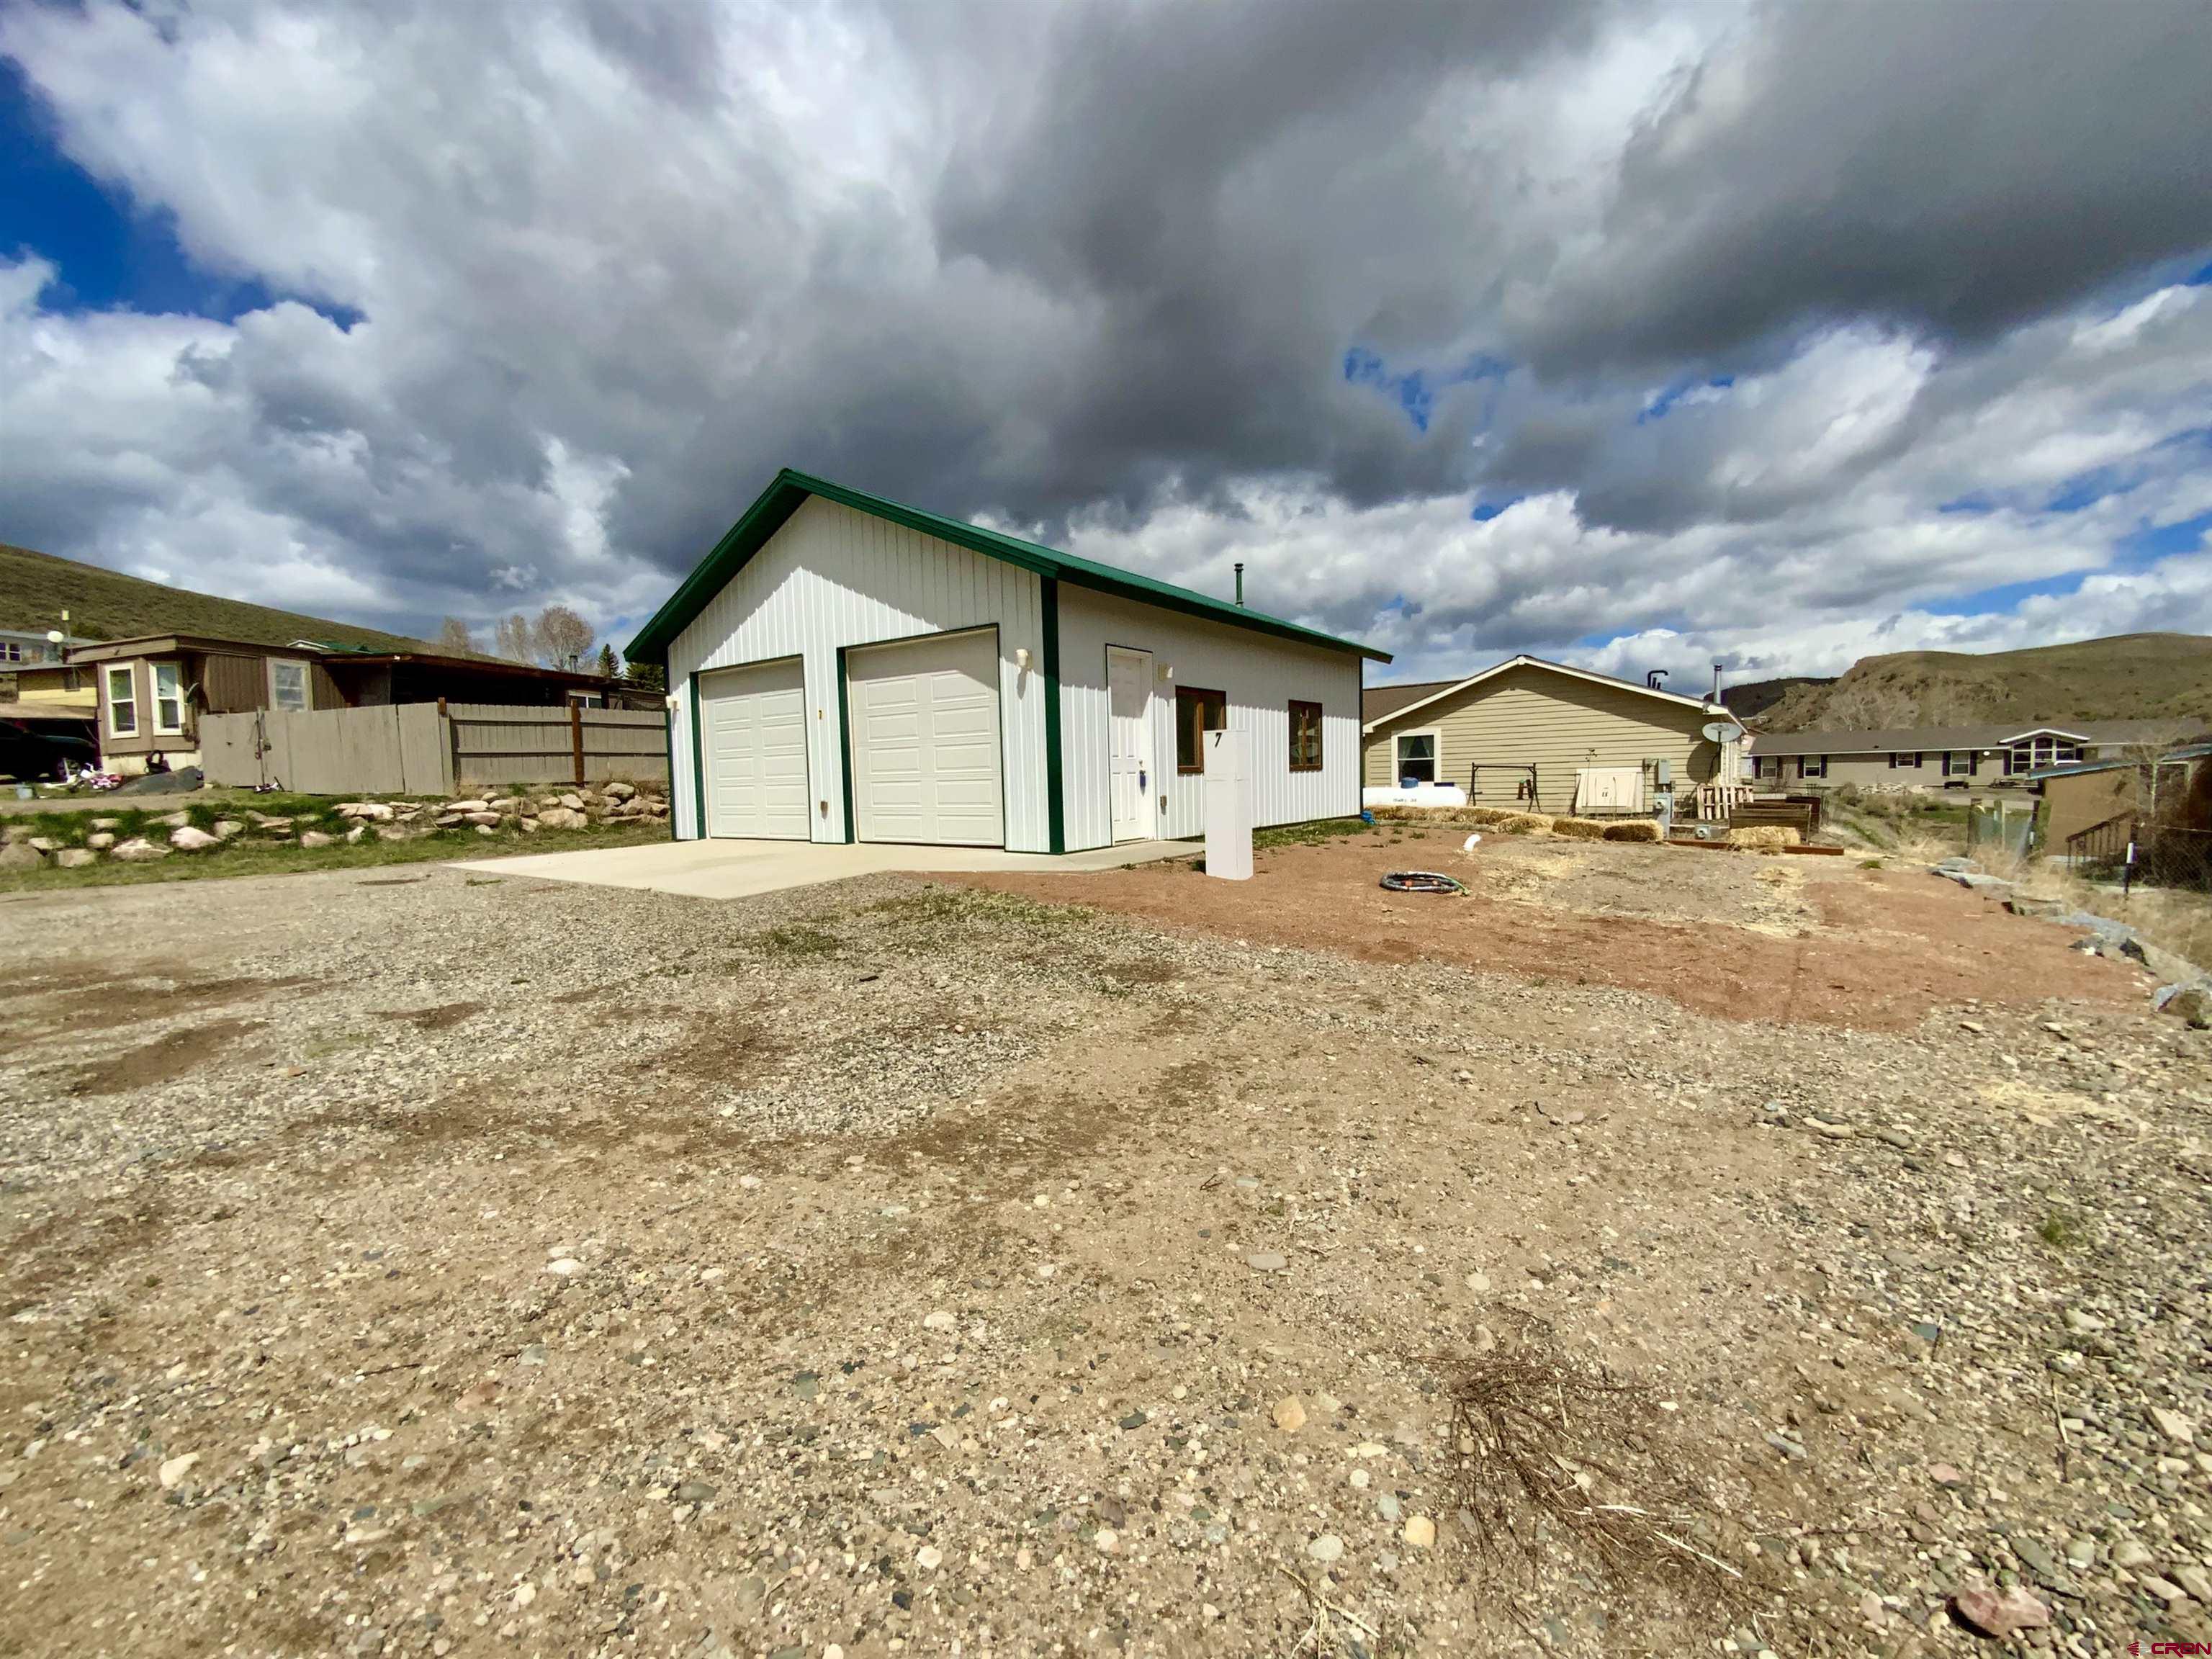 A very nice lot within Antelope Hills that is ready to move your mobile home too.  This lot has a 32x28 detached garage with concrete floor and electric. Sewer and Water Taps are installed. You could also park your 5th wheel camper for the summer adventures in the Gunnison Valley.